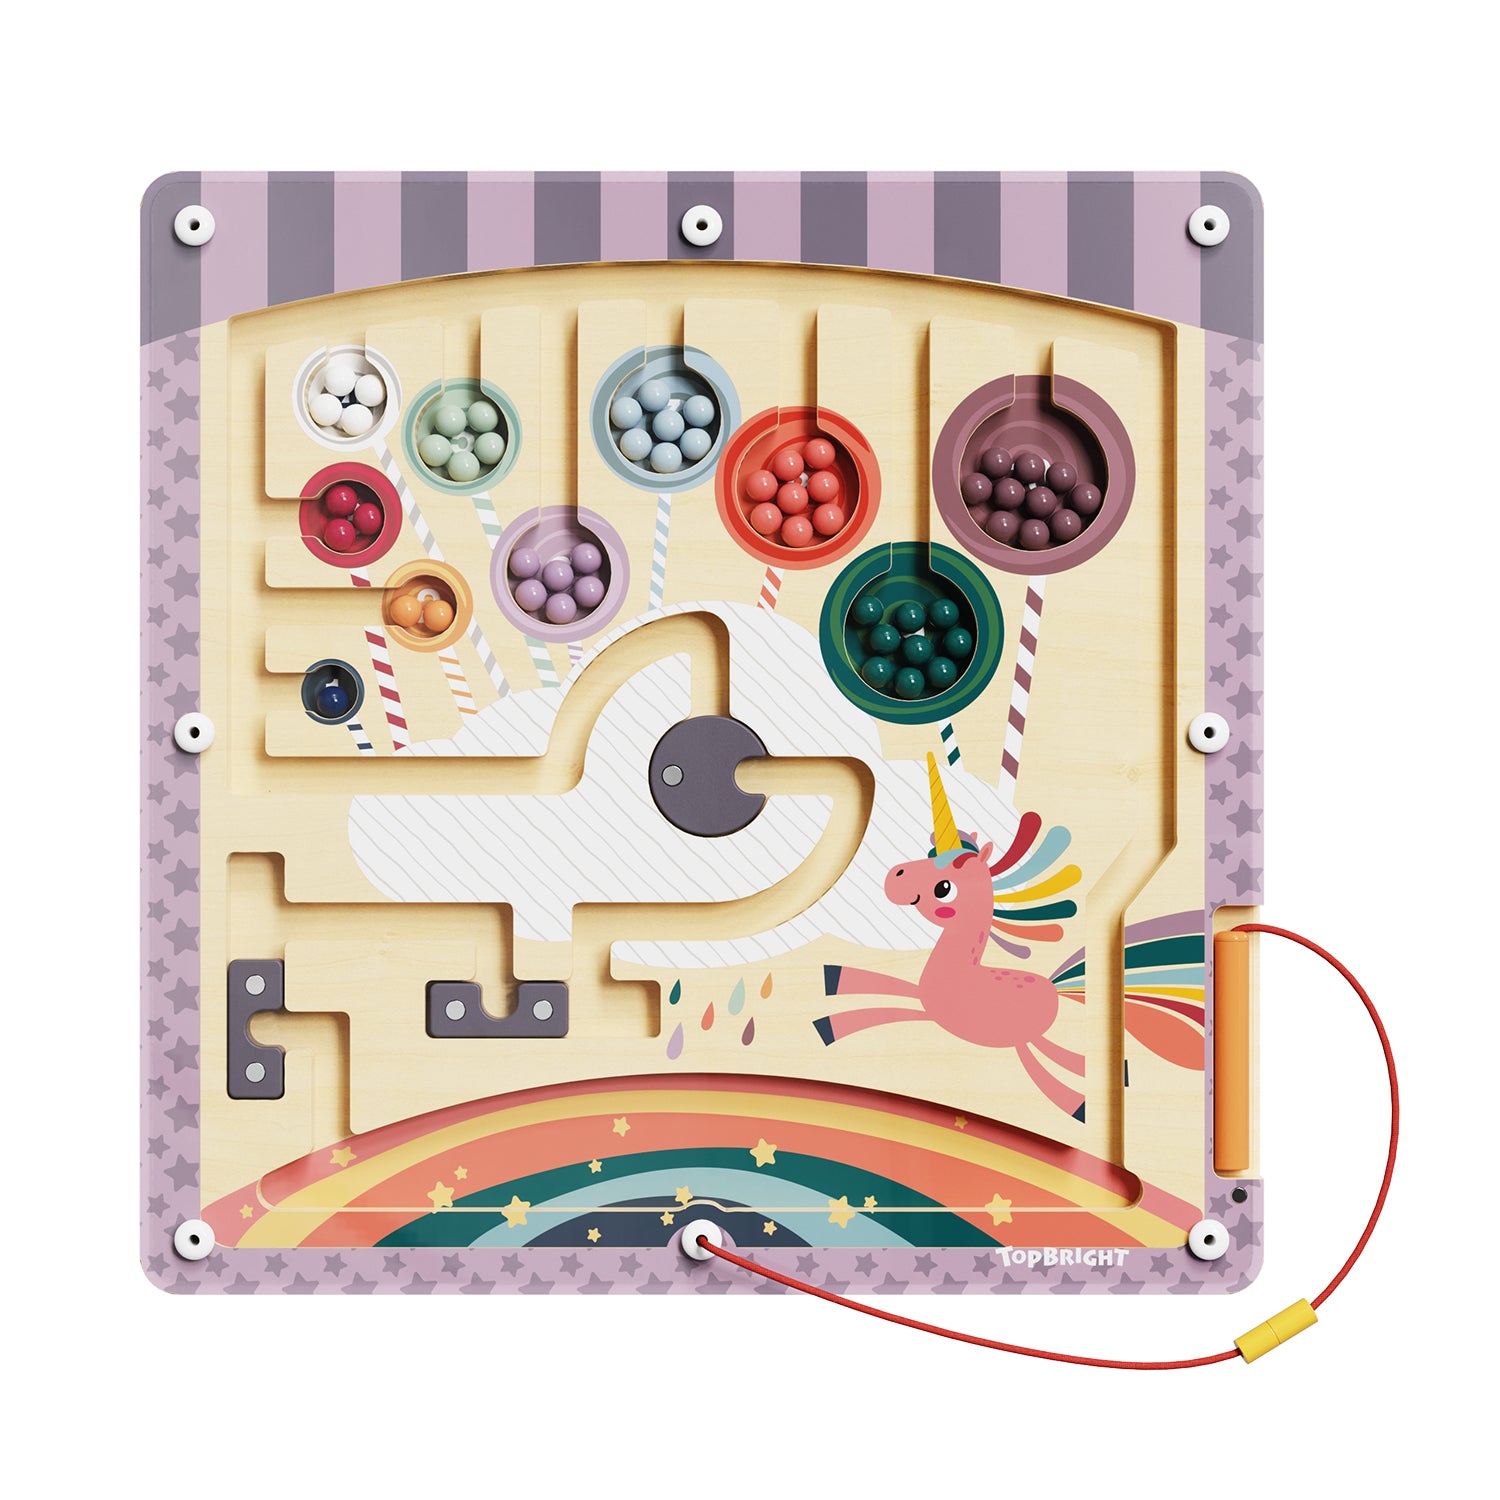 Thanks to the plexiglass panel, the individual parts remain safely stowed away. The pen is also stored on the side of the magnetic game. This makes the magnetic maze the perfect companion when traveling.